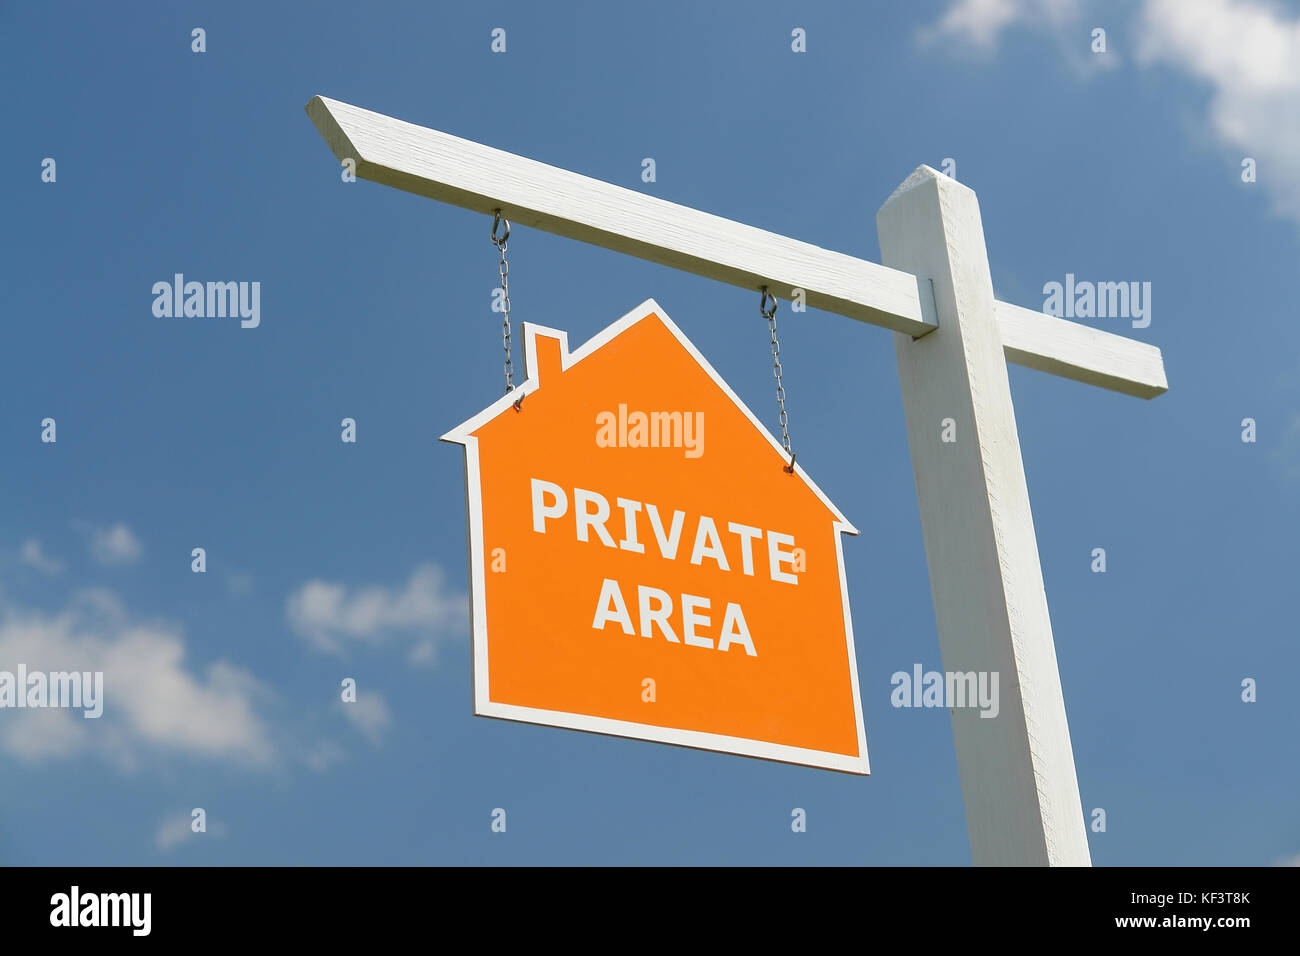 White wooden post with orange house-shaped notice board spelling Private Area - over blue sky Stock Photo